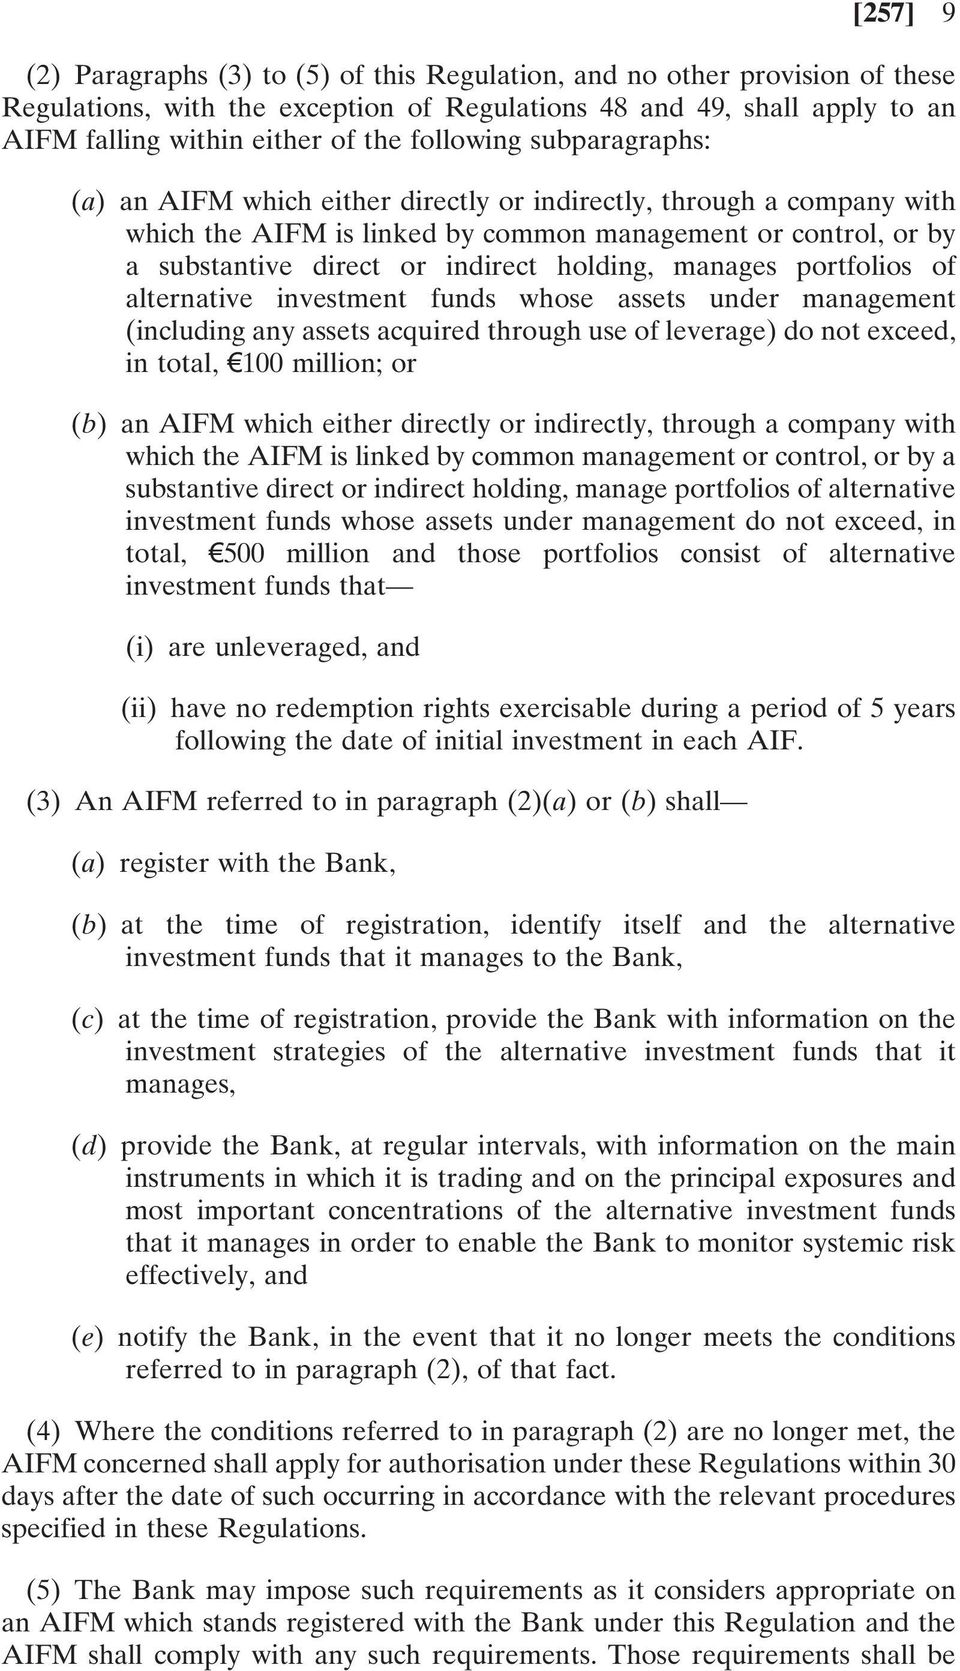 holding, manages portfolios of alternative investment funds whose assets under management (including any assets acquired through use of leverage) do not exceed, in total, 100 million; or (b) an AIFM